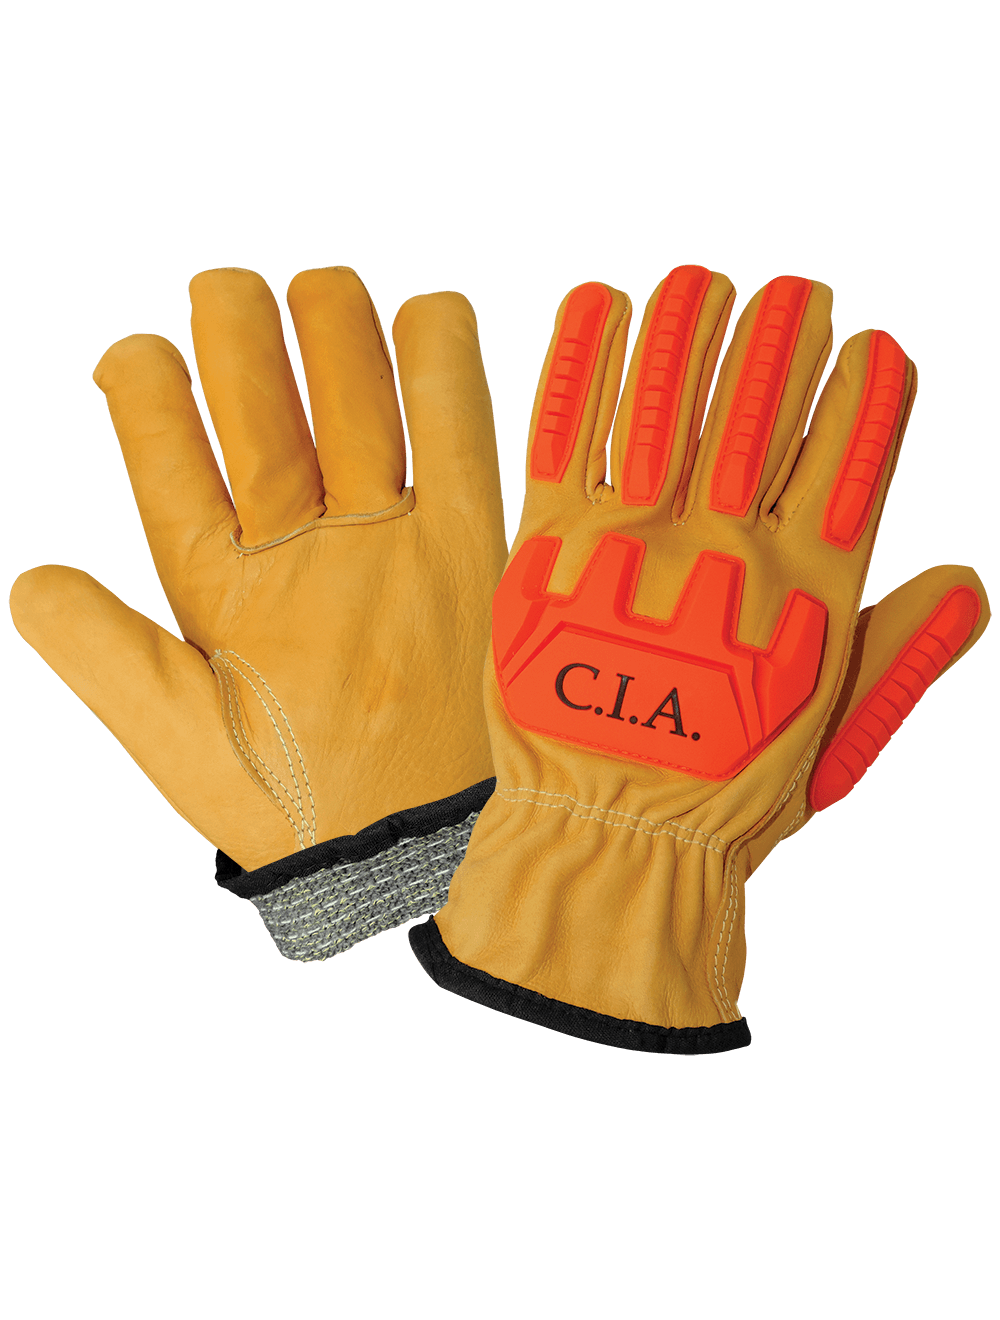 Premium Cowhide Grain Leather Cut, Impact, Abrasion Resistant Gloves - LIMITED STOCK - CIA3200